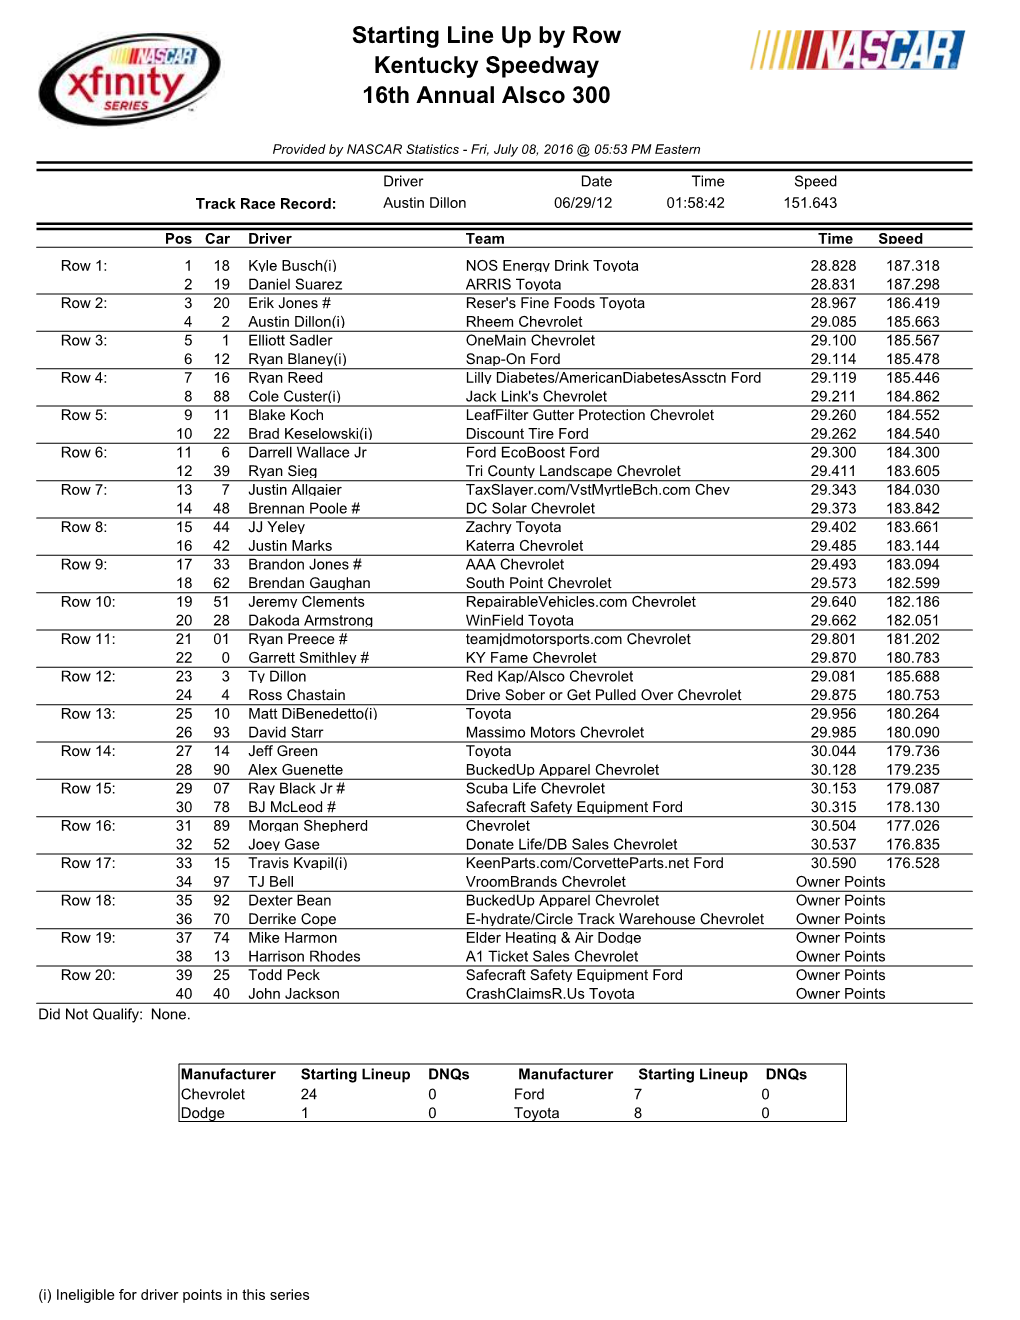 Starting Line up by Row Kentucky Speedway 16Th Annual Alsco 300